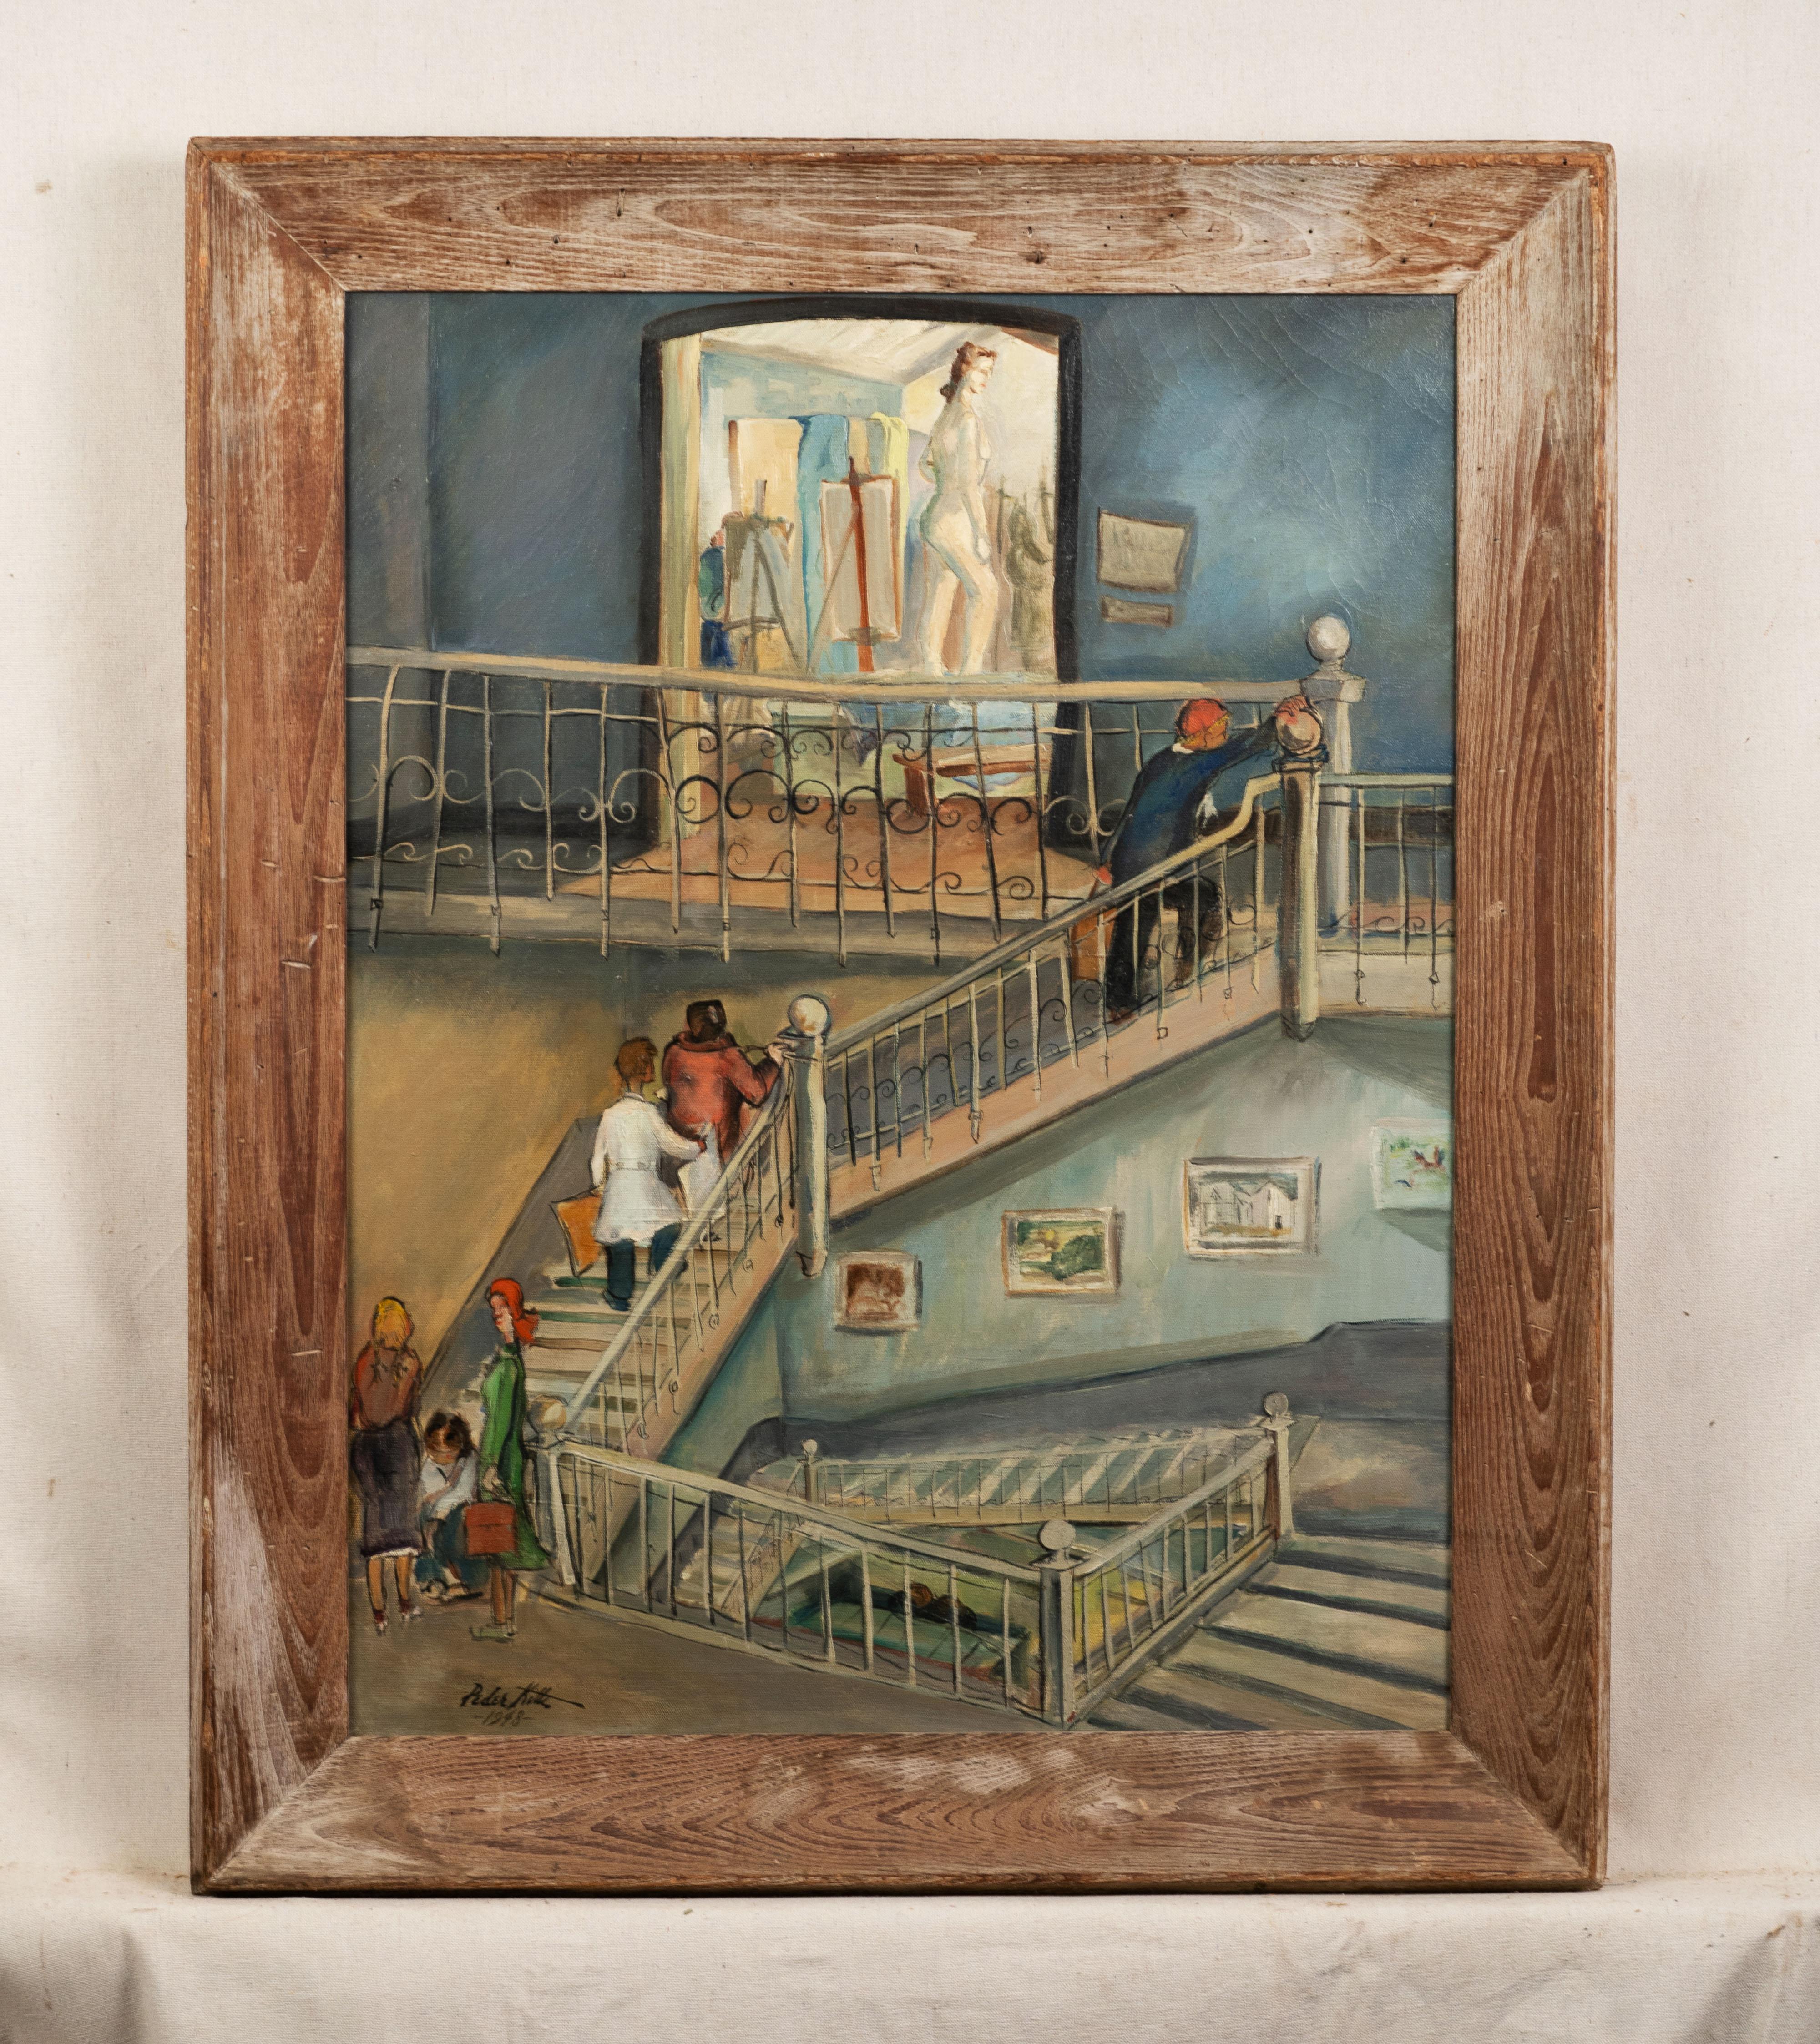 Antique American modernist interior view oil painting.  Oil on canvas.  Framed.  Signed illegibly.  